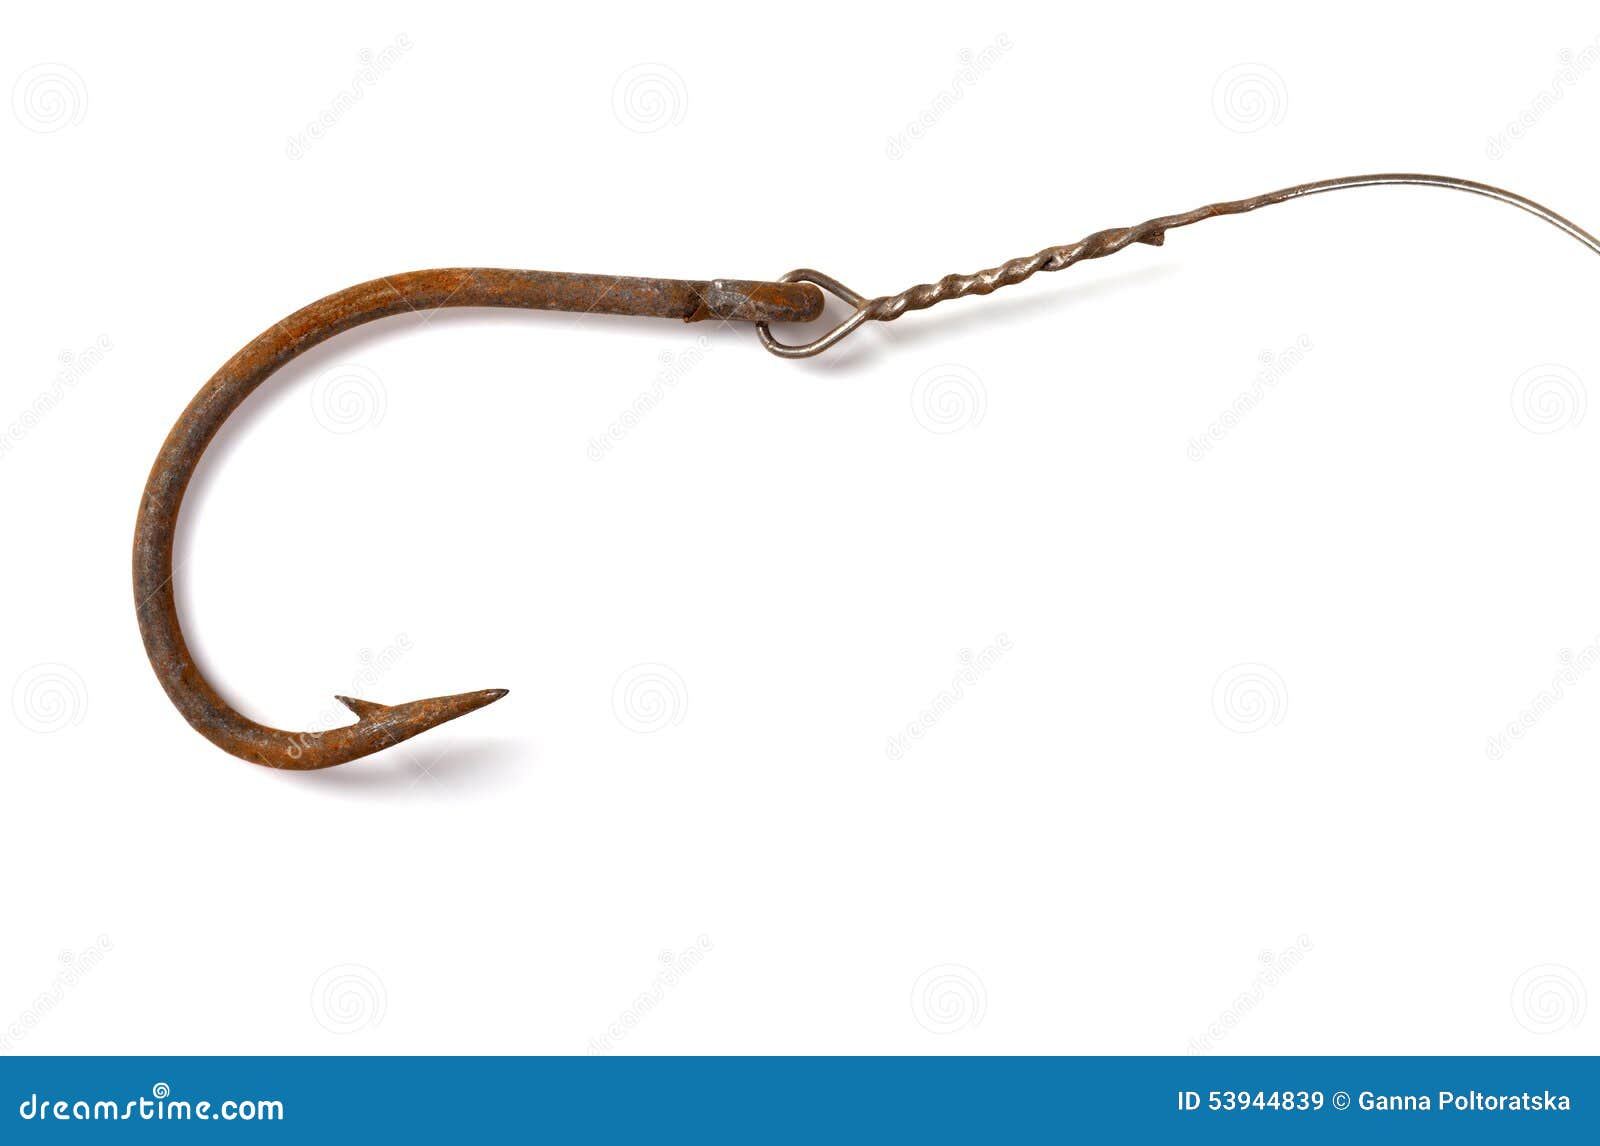 https://thumbs.dreamstime.com/z/rusty-old-fish-hook-isolated-white-background-53944839.jpg